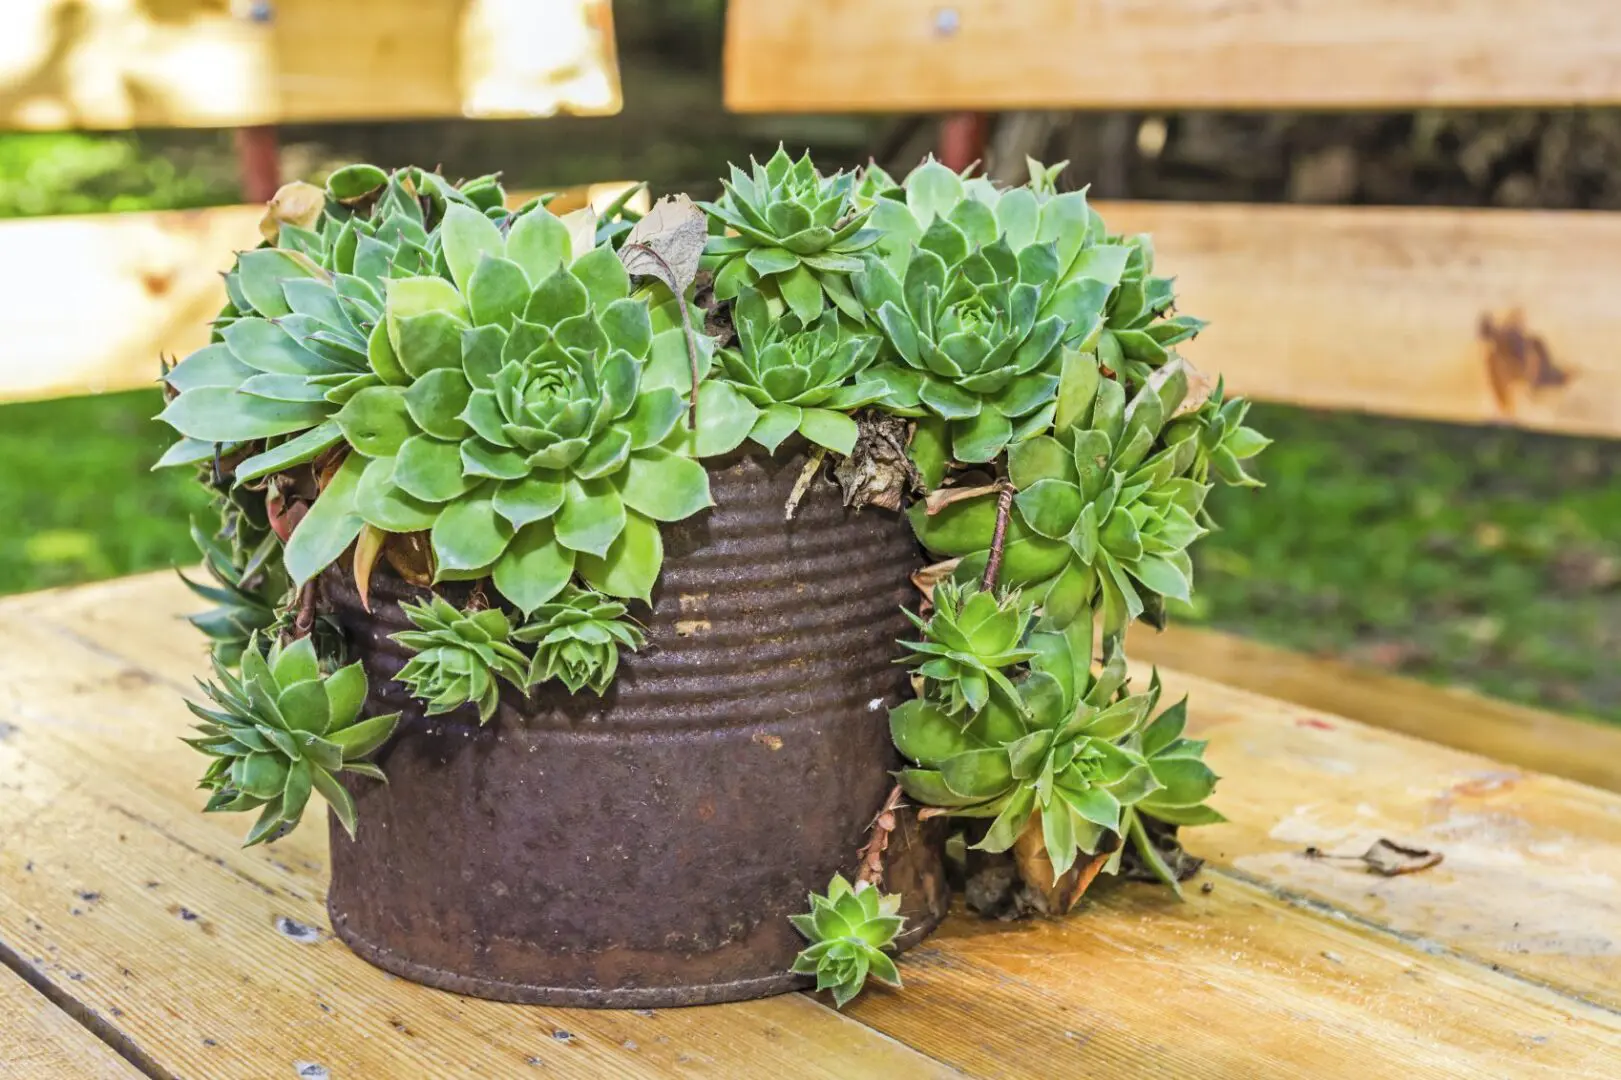 Succulents in a rusty bucket on a wooden table.